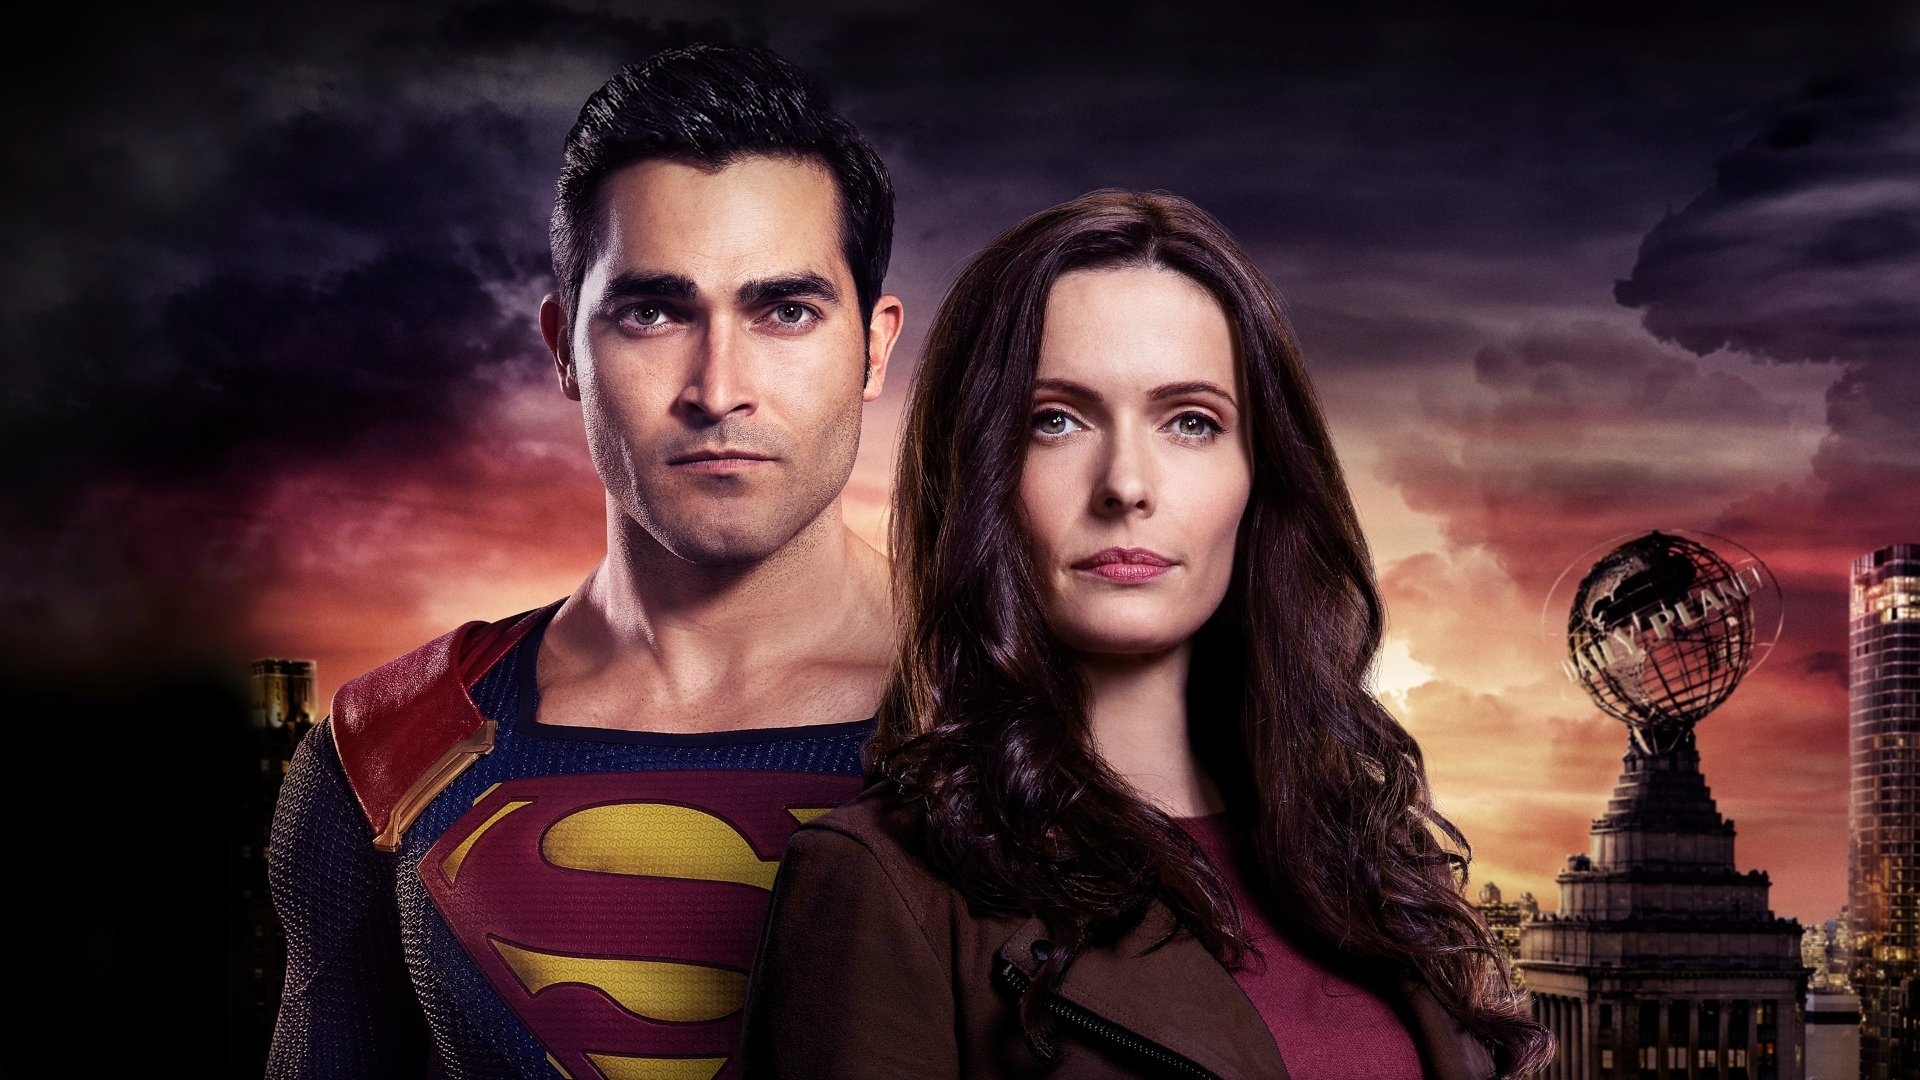 Superman and Lois, HD Wallpapers, Love, Relationship, 1920x1080 Full HD Desktop